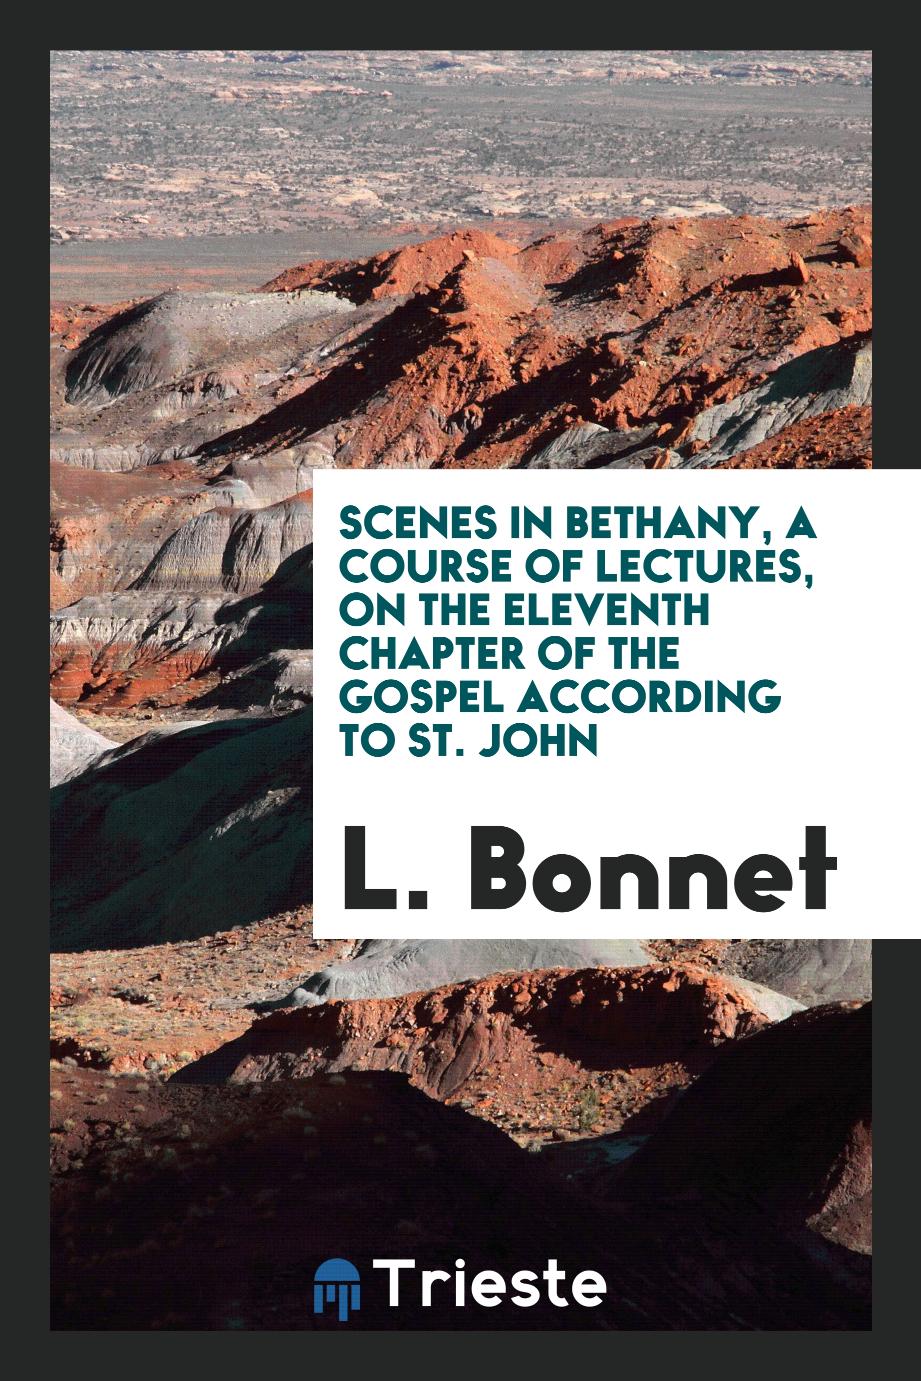 Scenes in Bethany, a Course of Lectures, on the Eleventh Chapter of the Gospel According to St. John